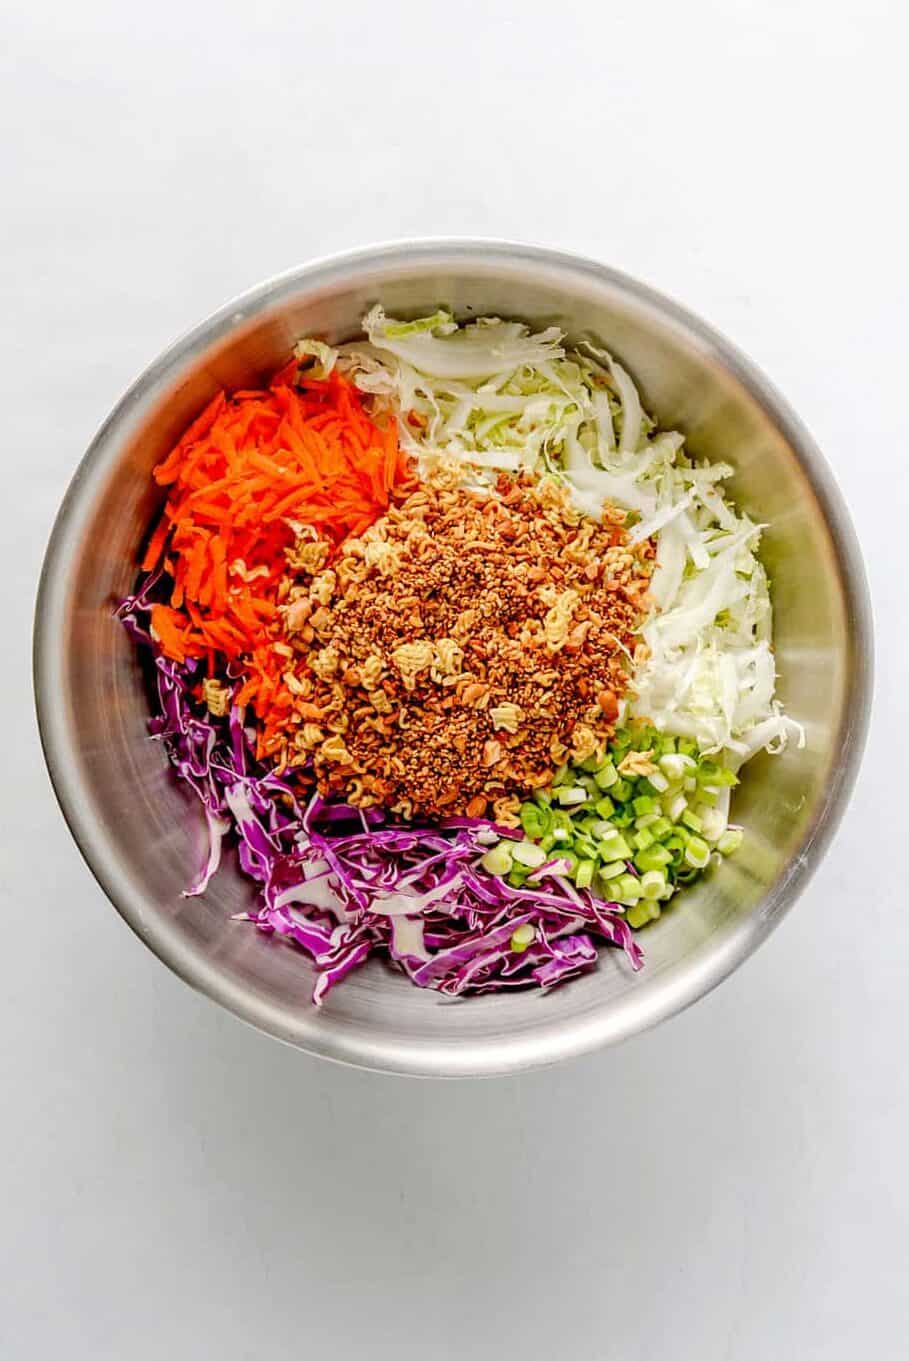 stainless steel mixing bowl with shredded veggies and the toasted crushed ramen noodles